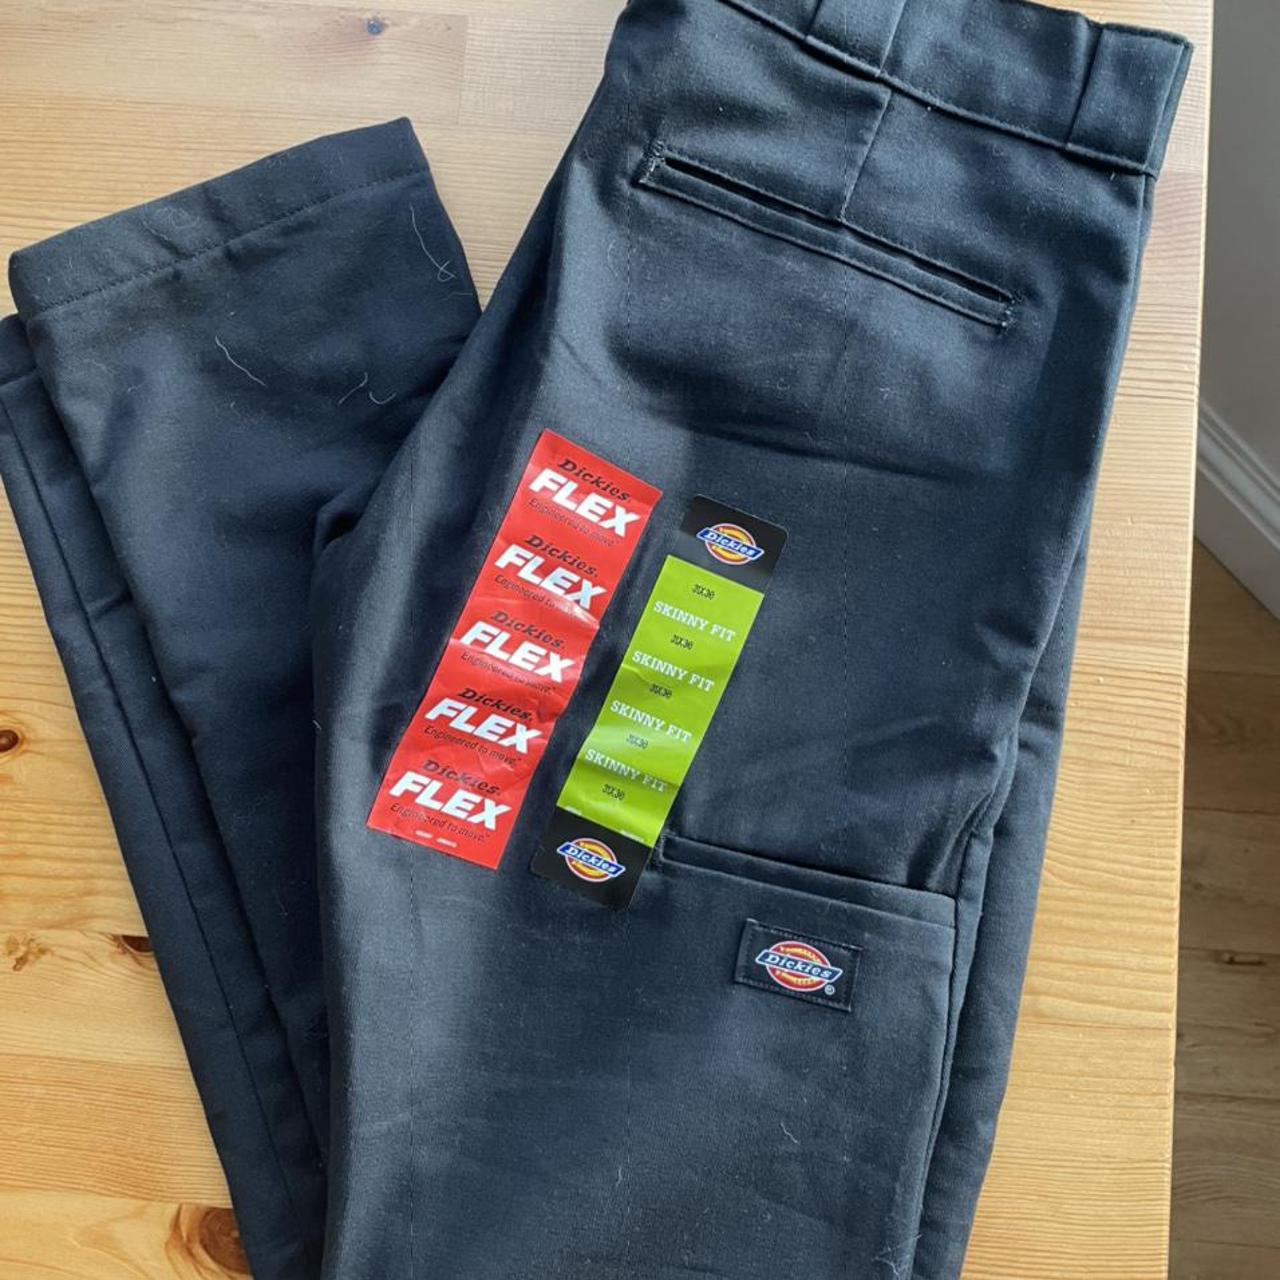 Product Image 1 - Dickies trousers never been worn